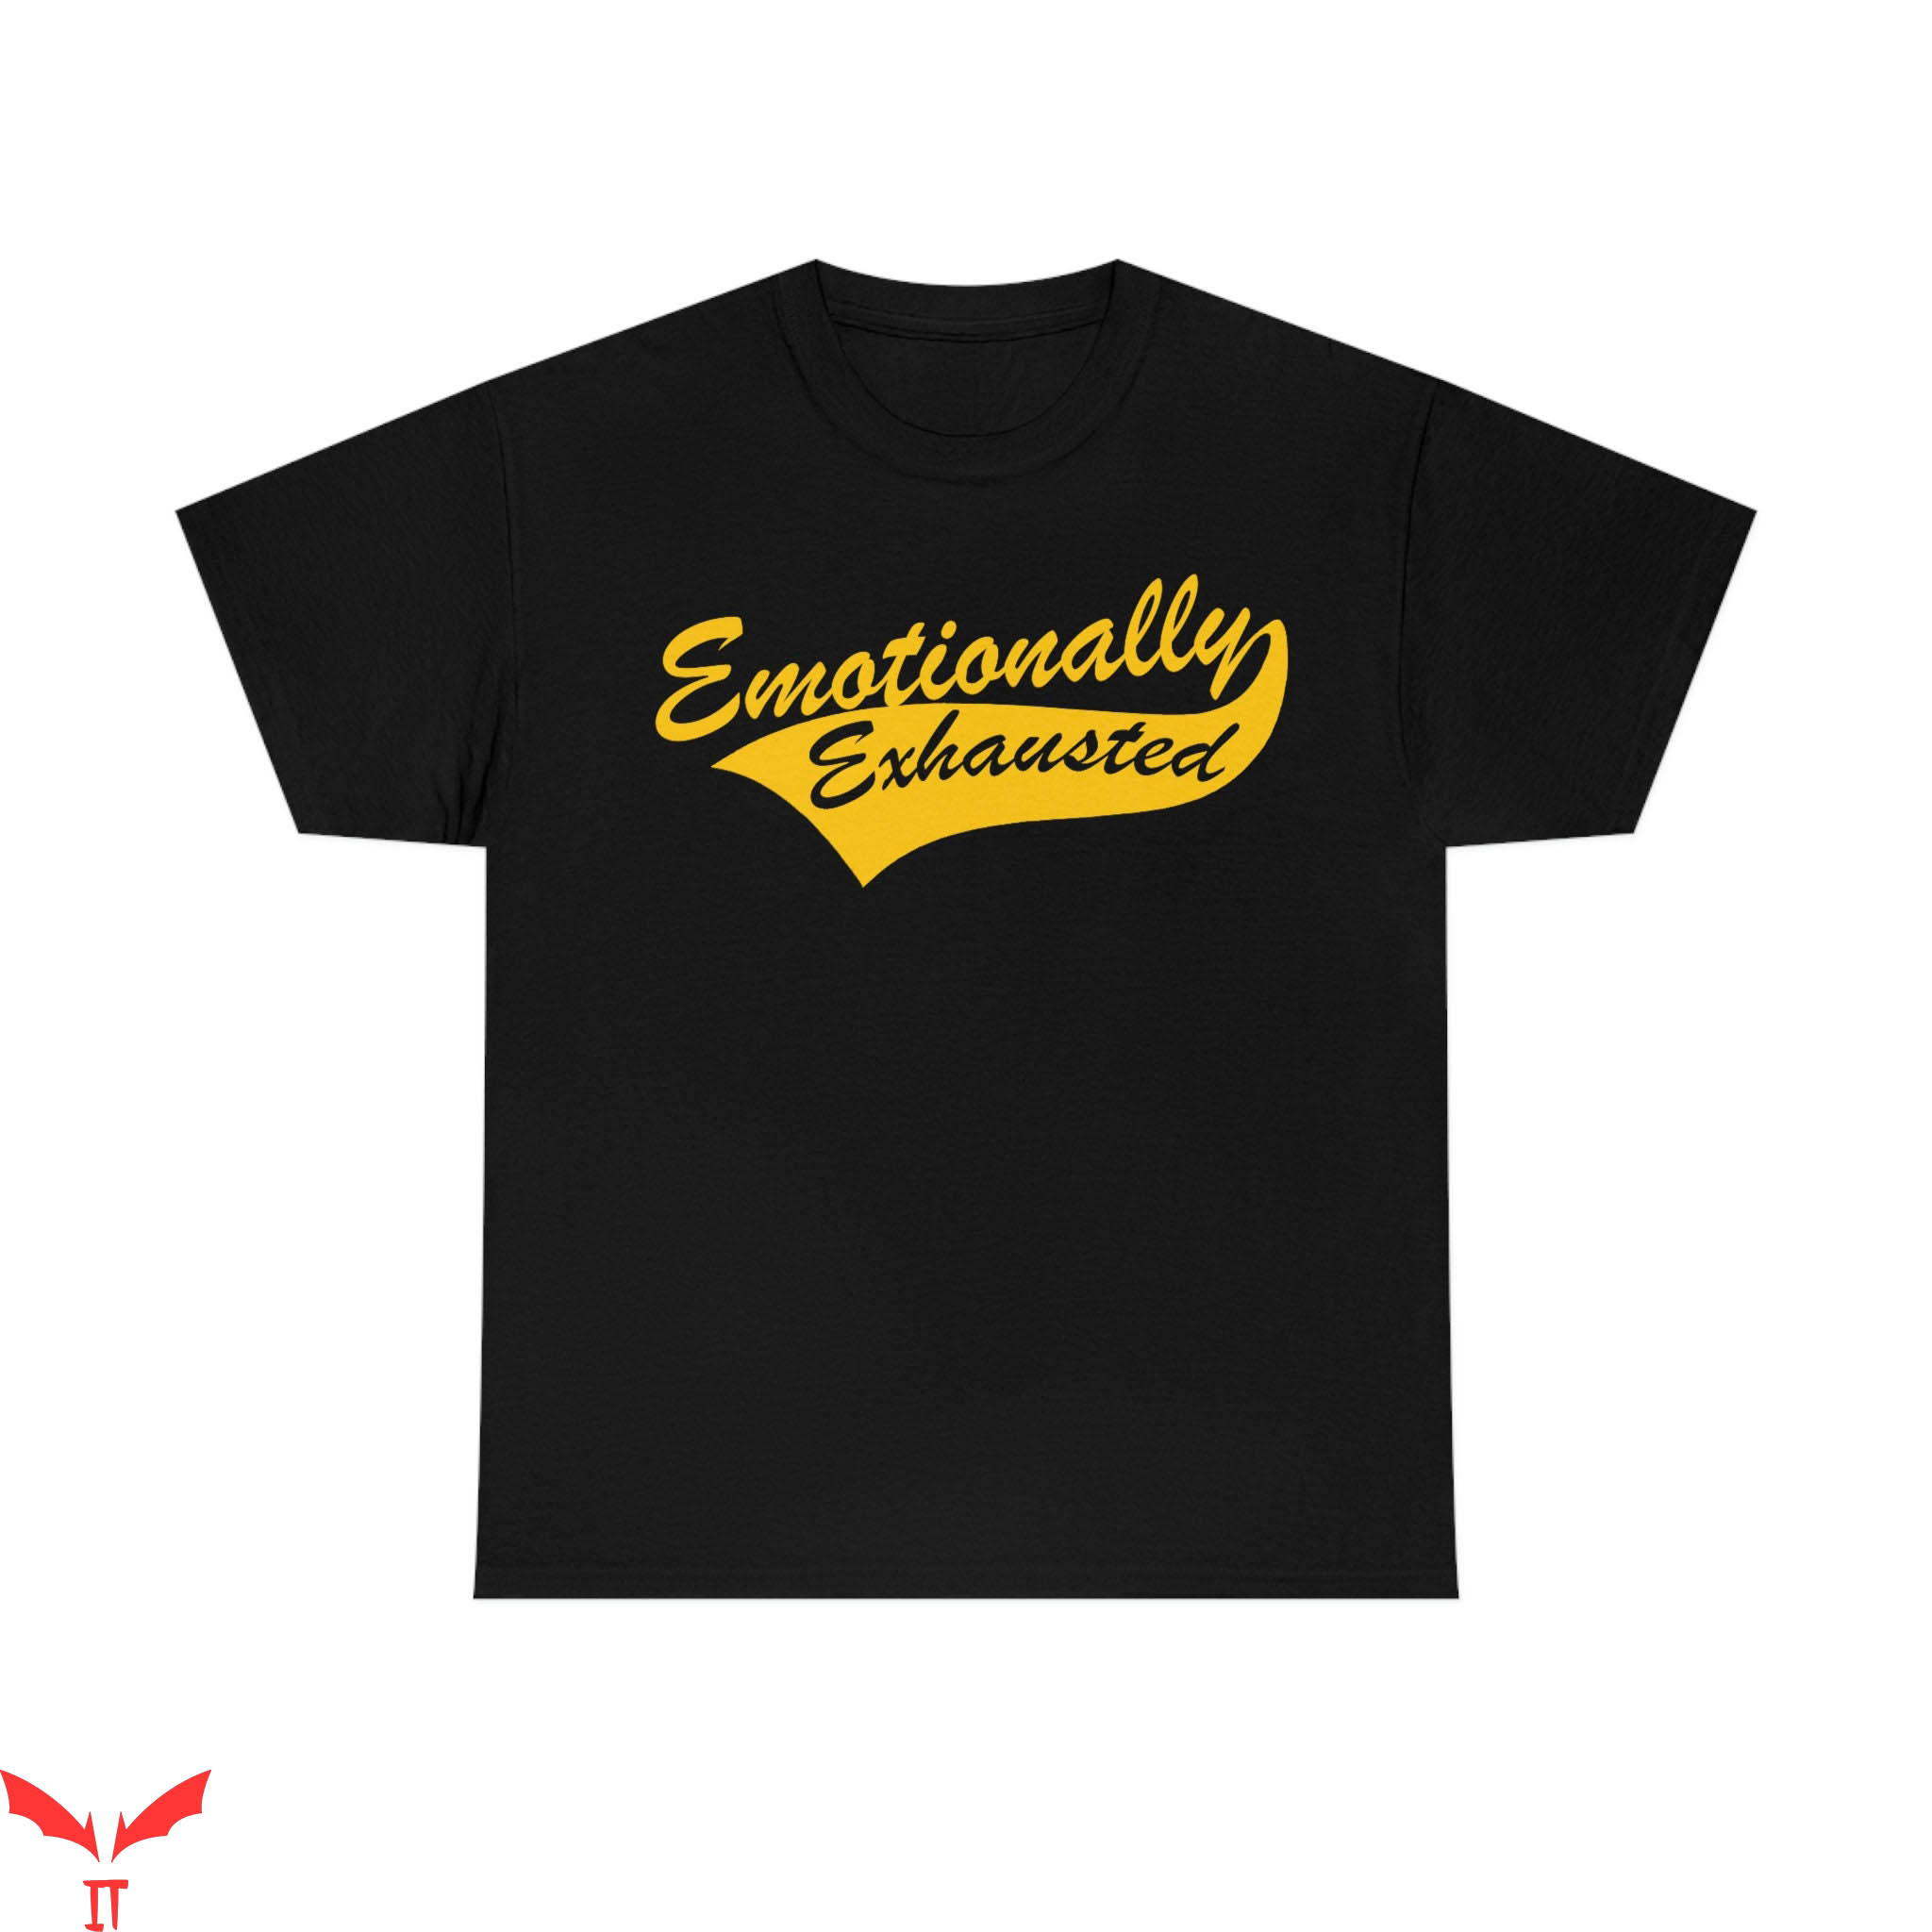 Emotionally Exhausted T-Shirt Cool Style Trendy Design Tee